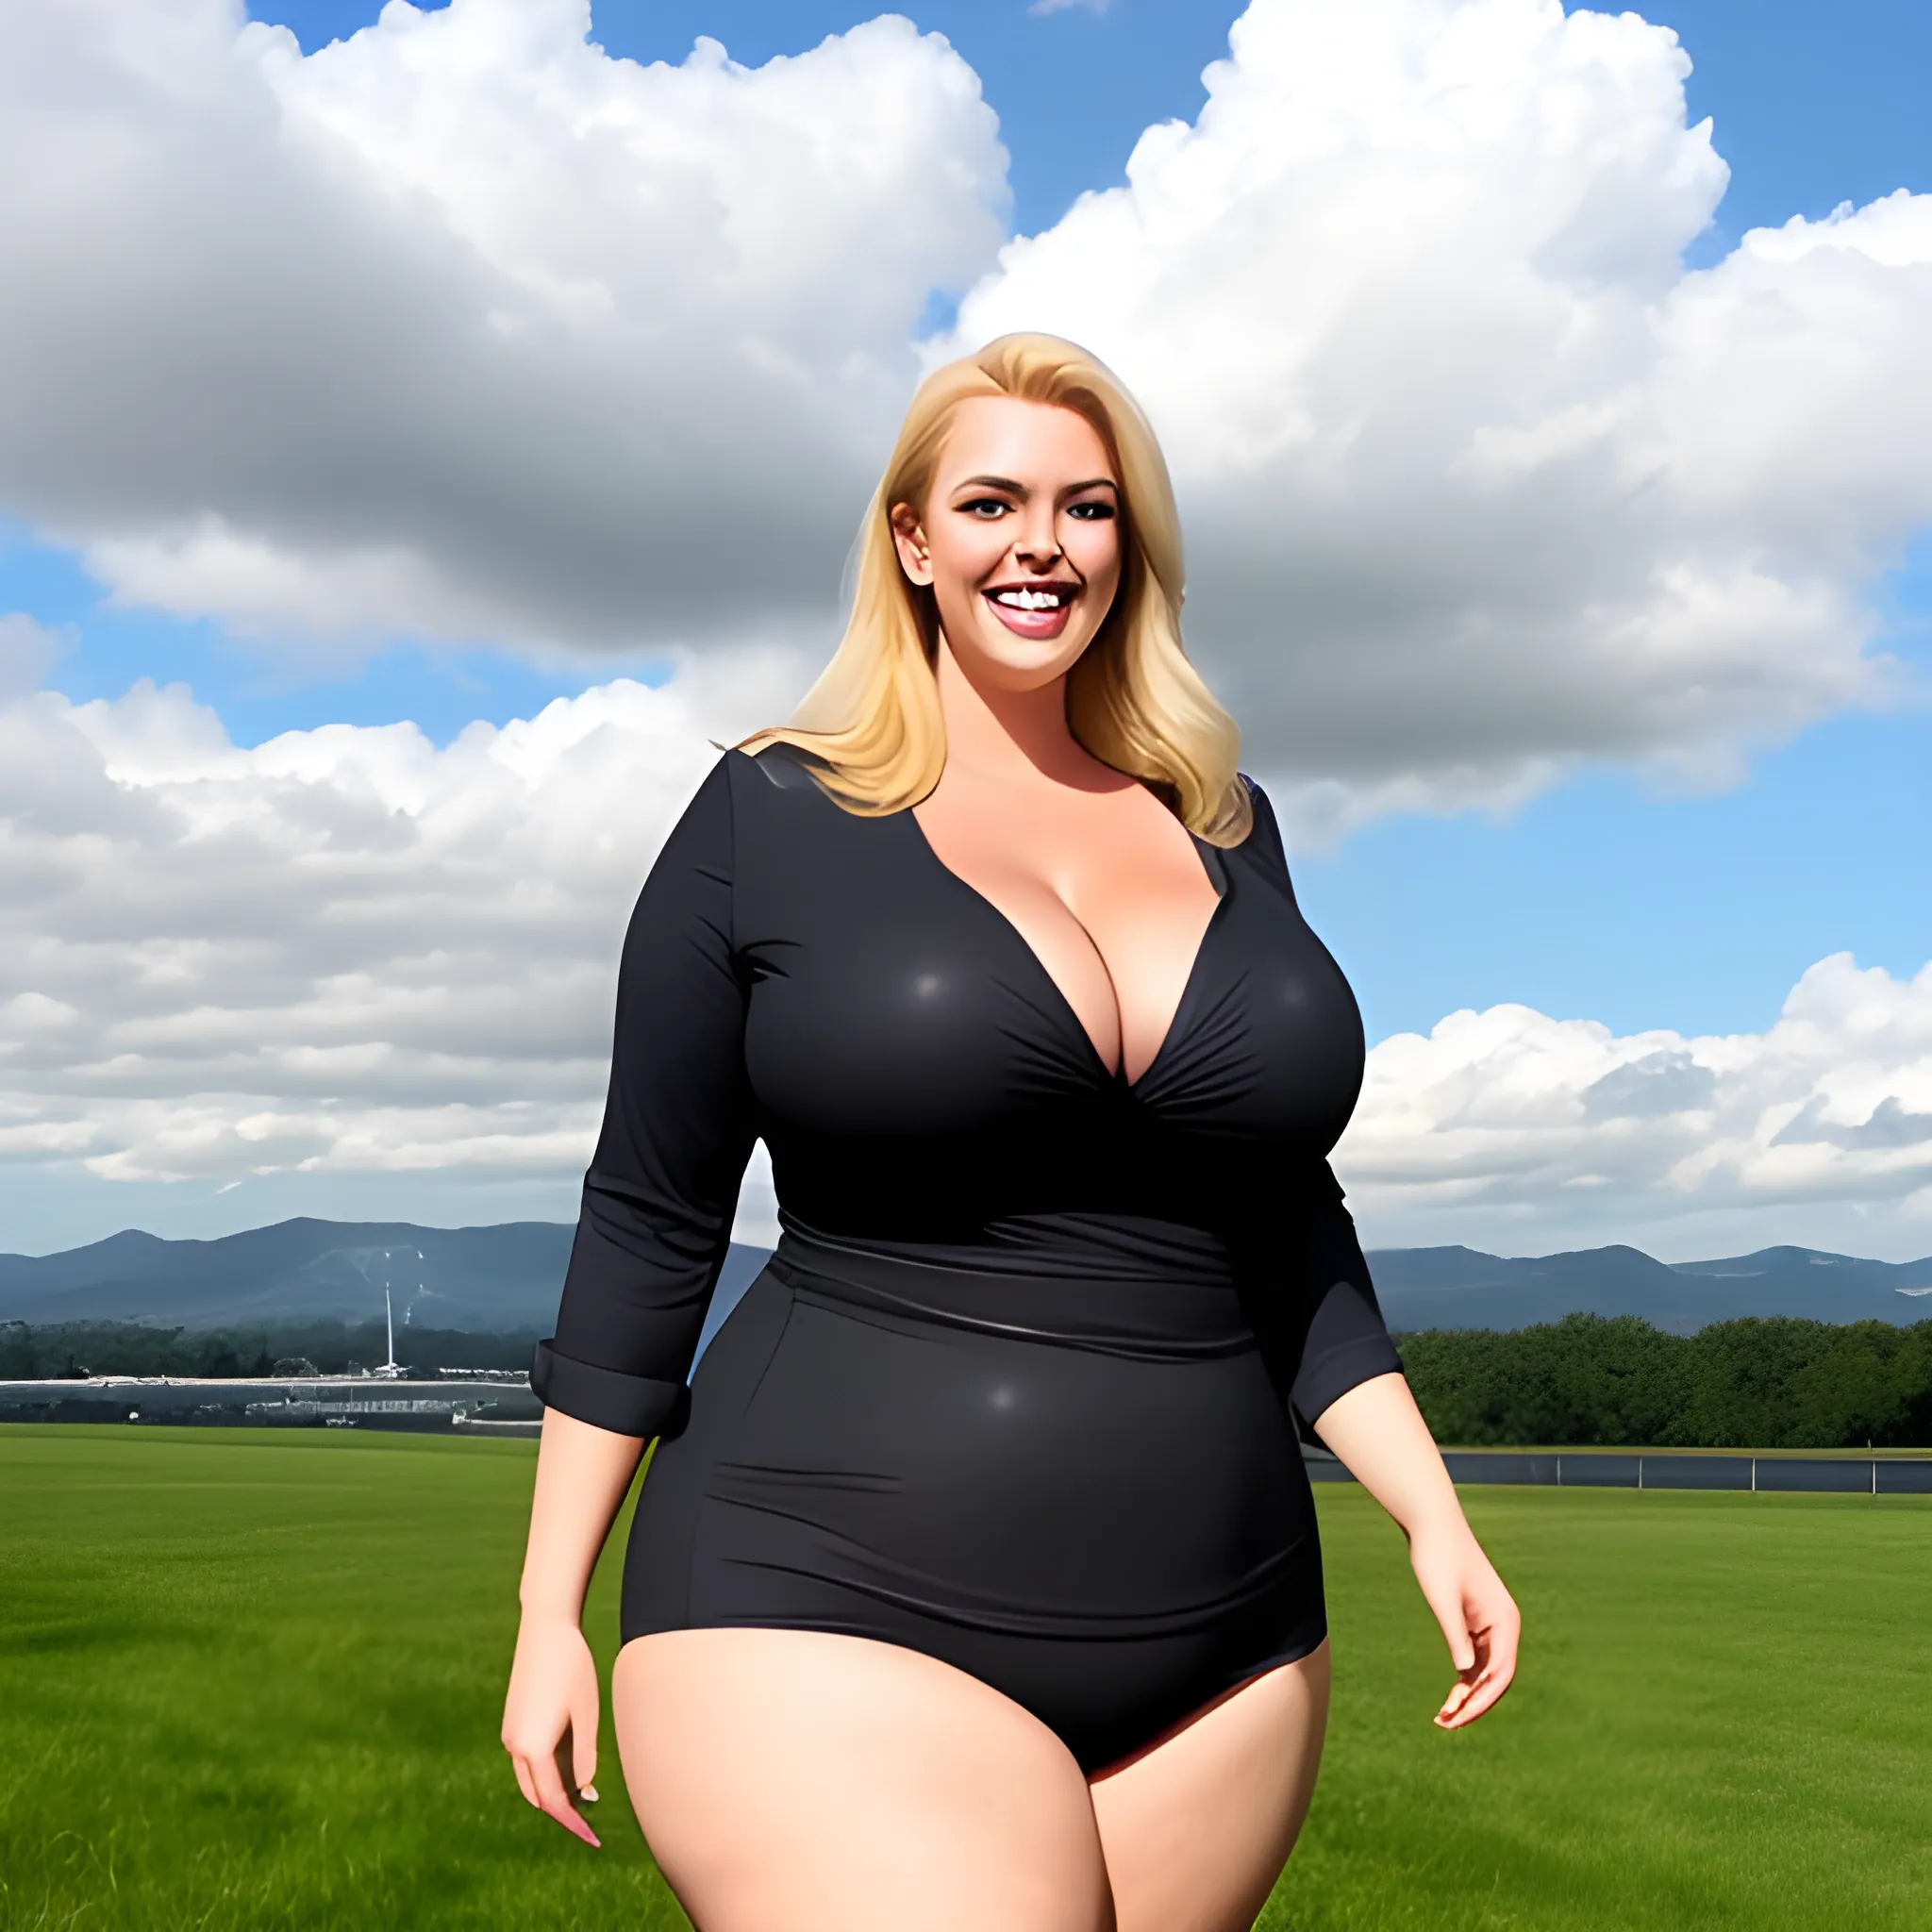 large and tall blonde plus size, not curvy girl with small head, 